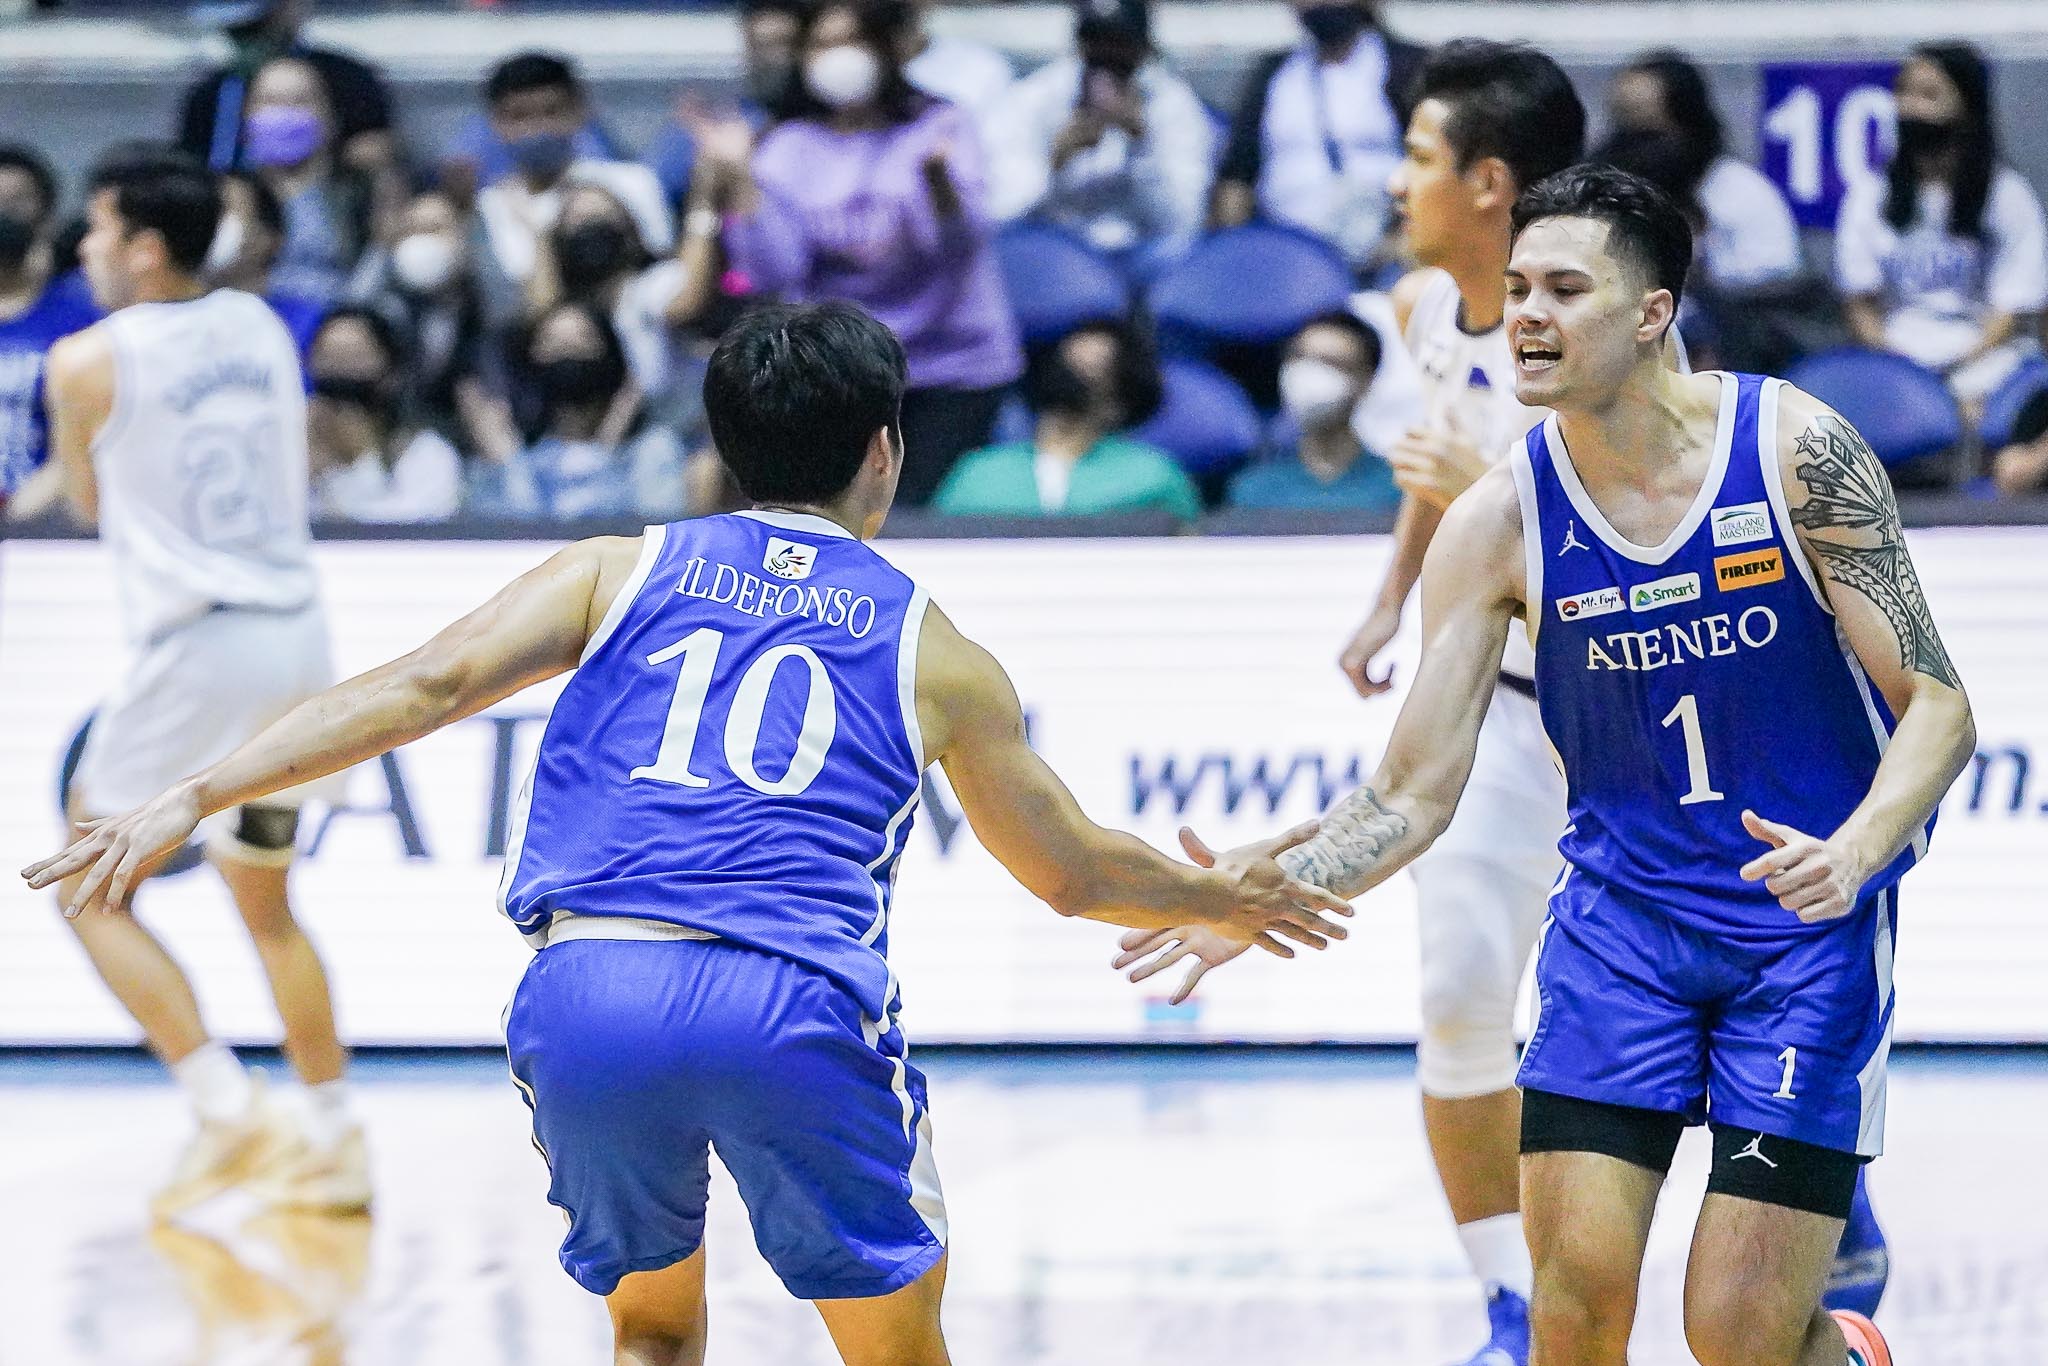 UAAP-MBB-Bryson-Ballungay-ATENEO-1 Well-rested Ateneo will not relax in prep for either Adamson, La Salle ADMU Basketball News UAAP  - philippine sports news